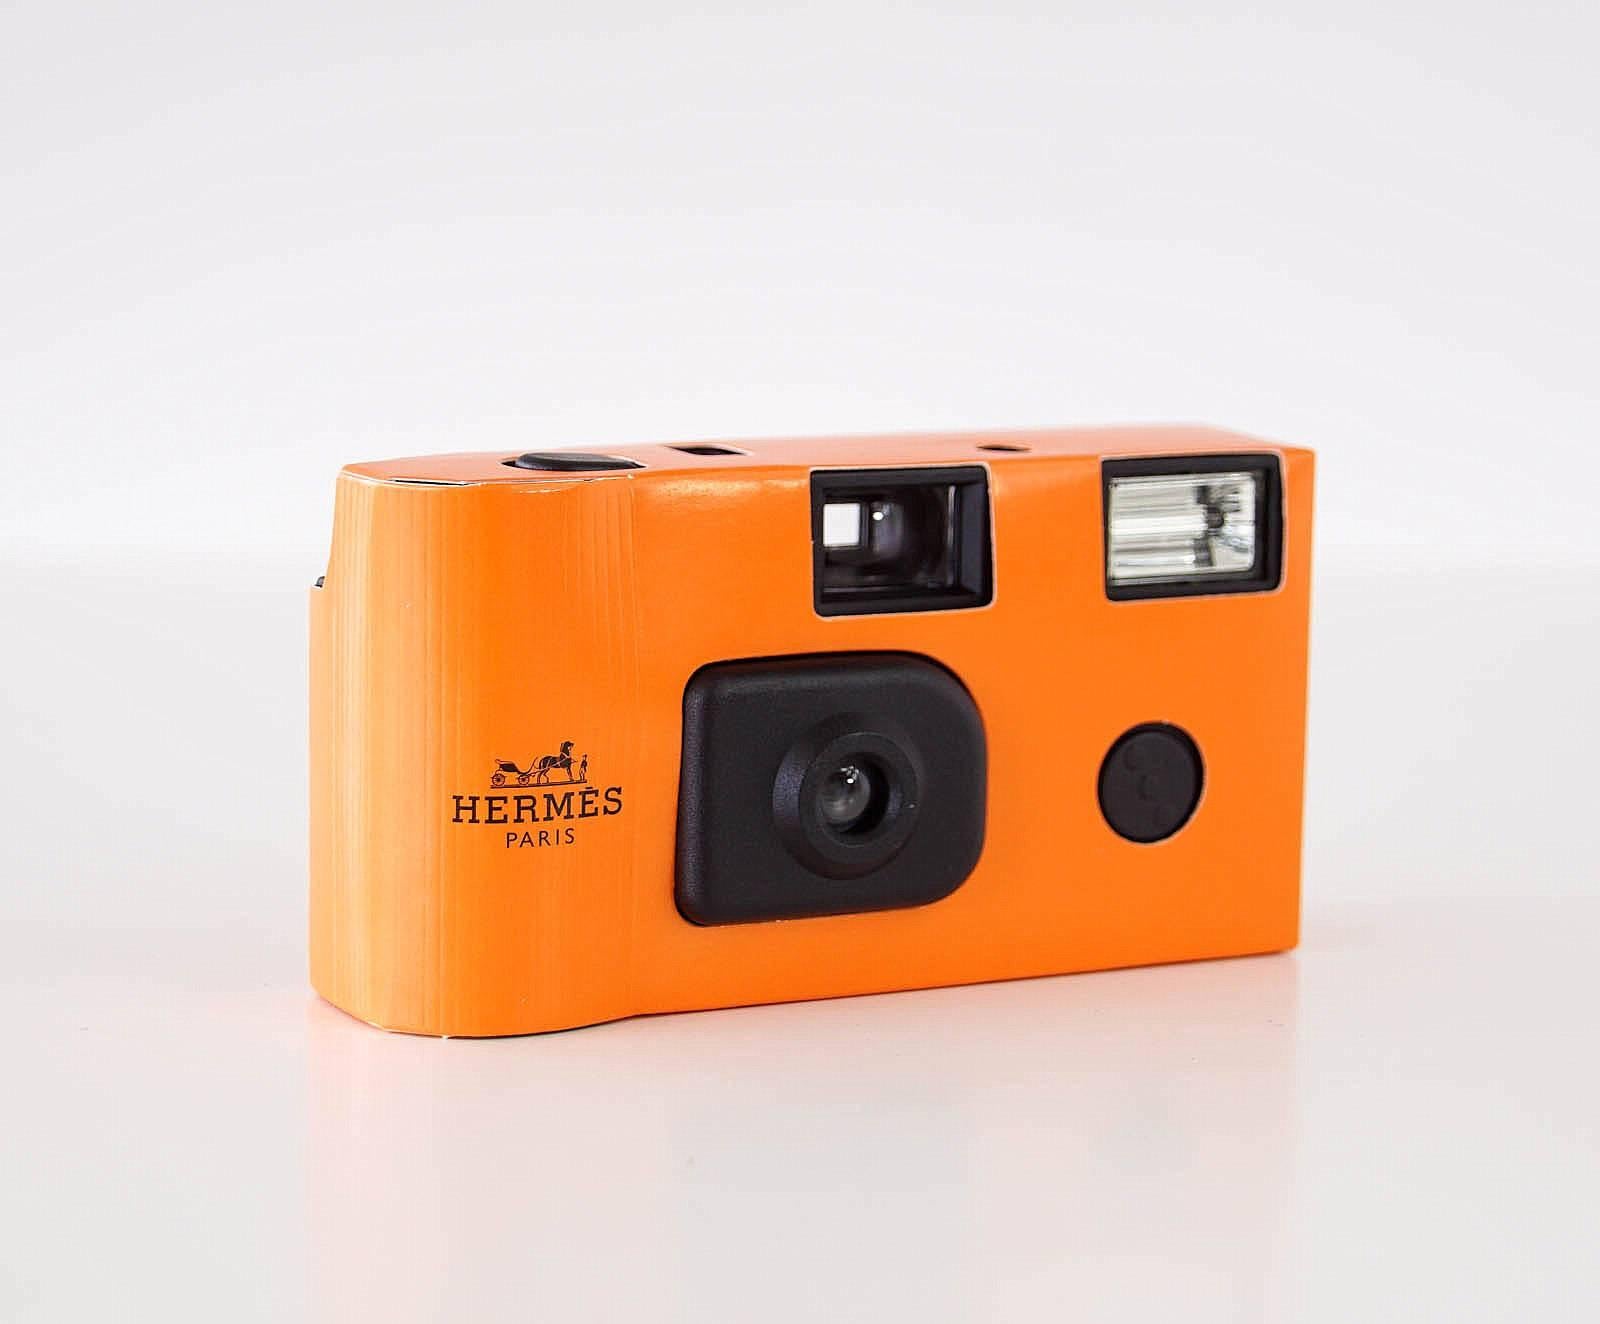 Guaranteed authentic HERMES disposable camera.
Disposable camera in classic Hermes orange.
The camera was produced in 2001 as a Limited Edition VIP gift item.
NEW or NEVER USED

CAMERA MEASURES:
LENGTH  4 3/8"
WIDTH  2 1/4"
DEPTH 